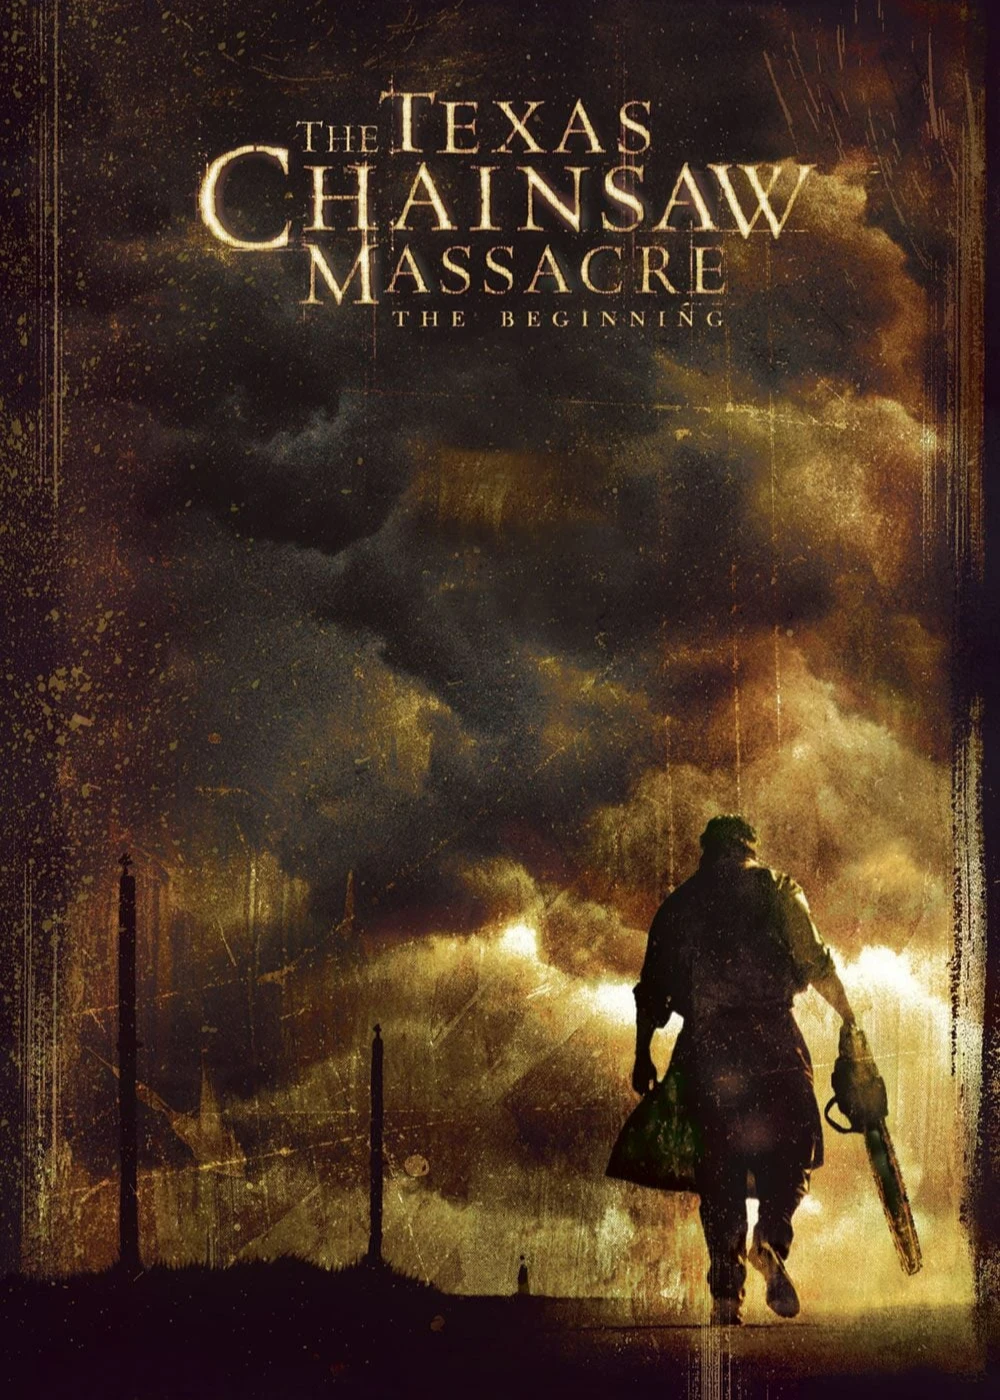 The Texas Chainsaw Massacre: The Beginning | The Texas Chainsaw Massacre: The Beginning (2006)